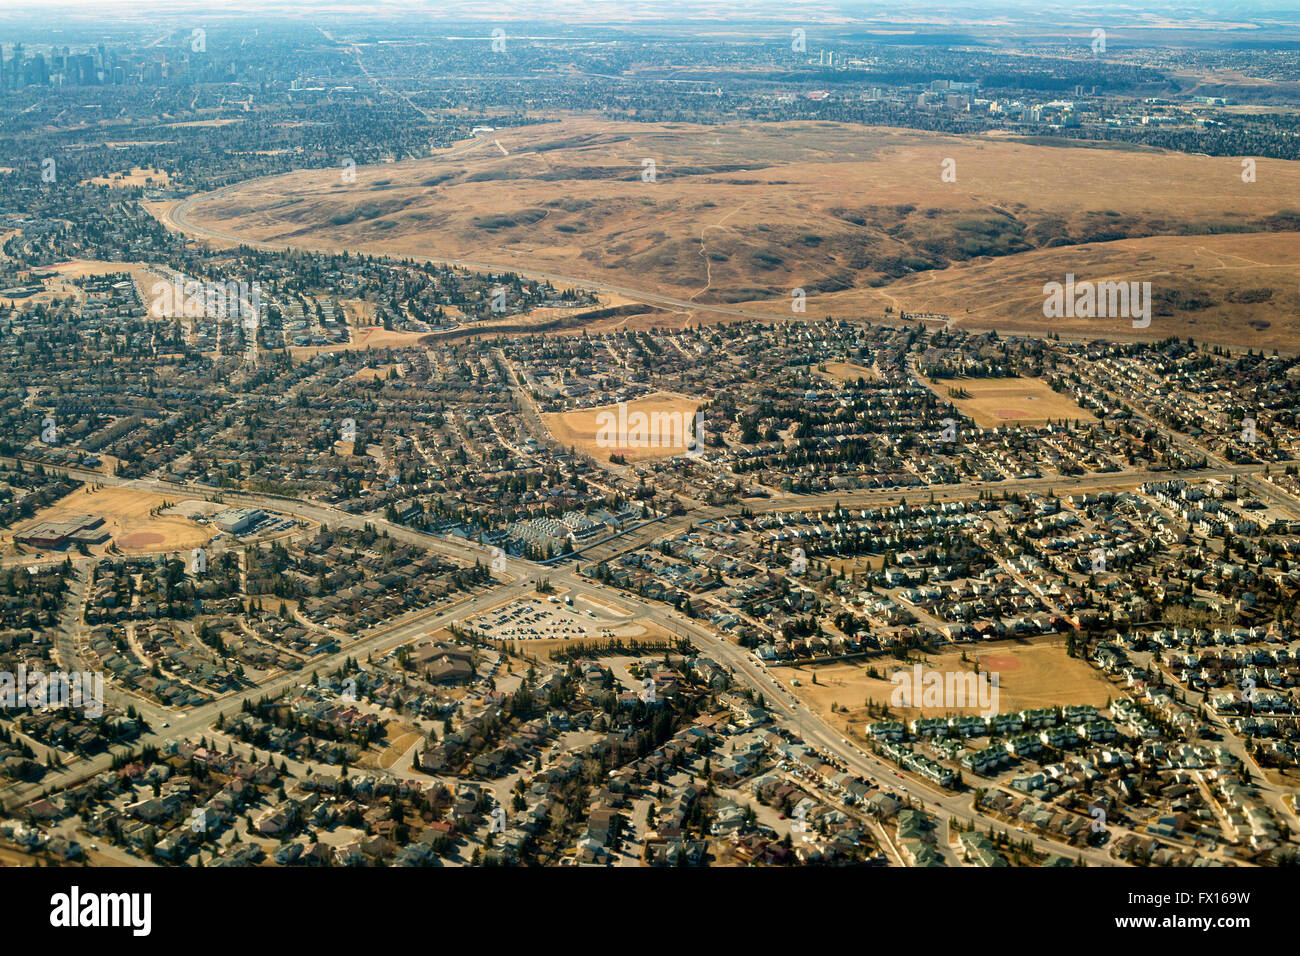 Nose Hill park rough fescue grassland ecosystem surrounded by residential suburban communities, aerial view. Stock Photo